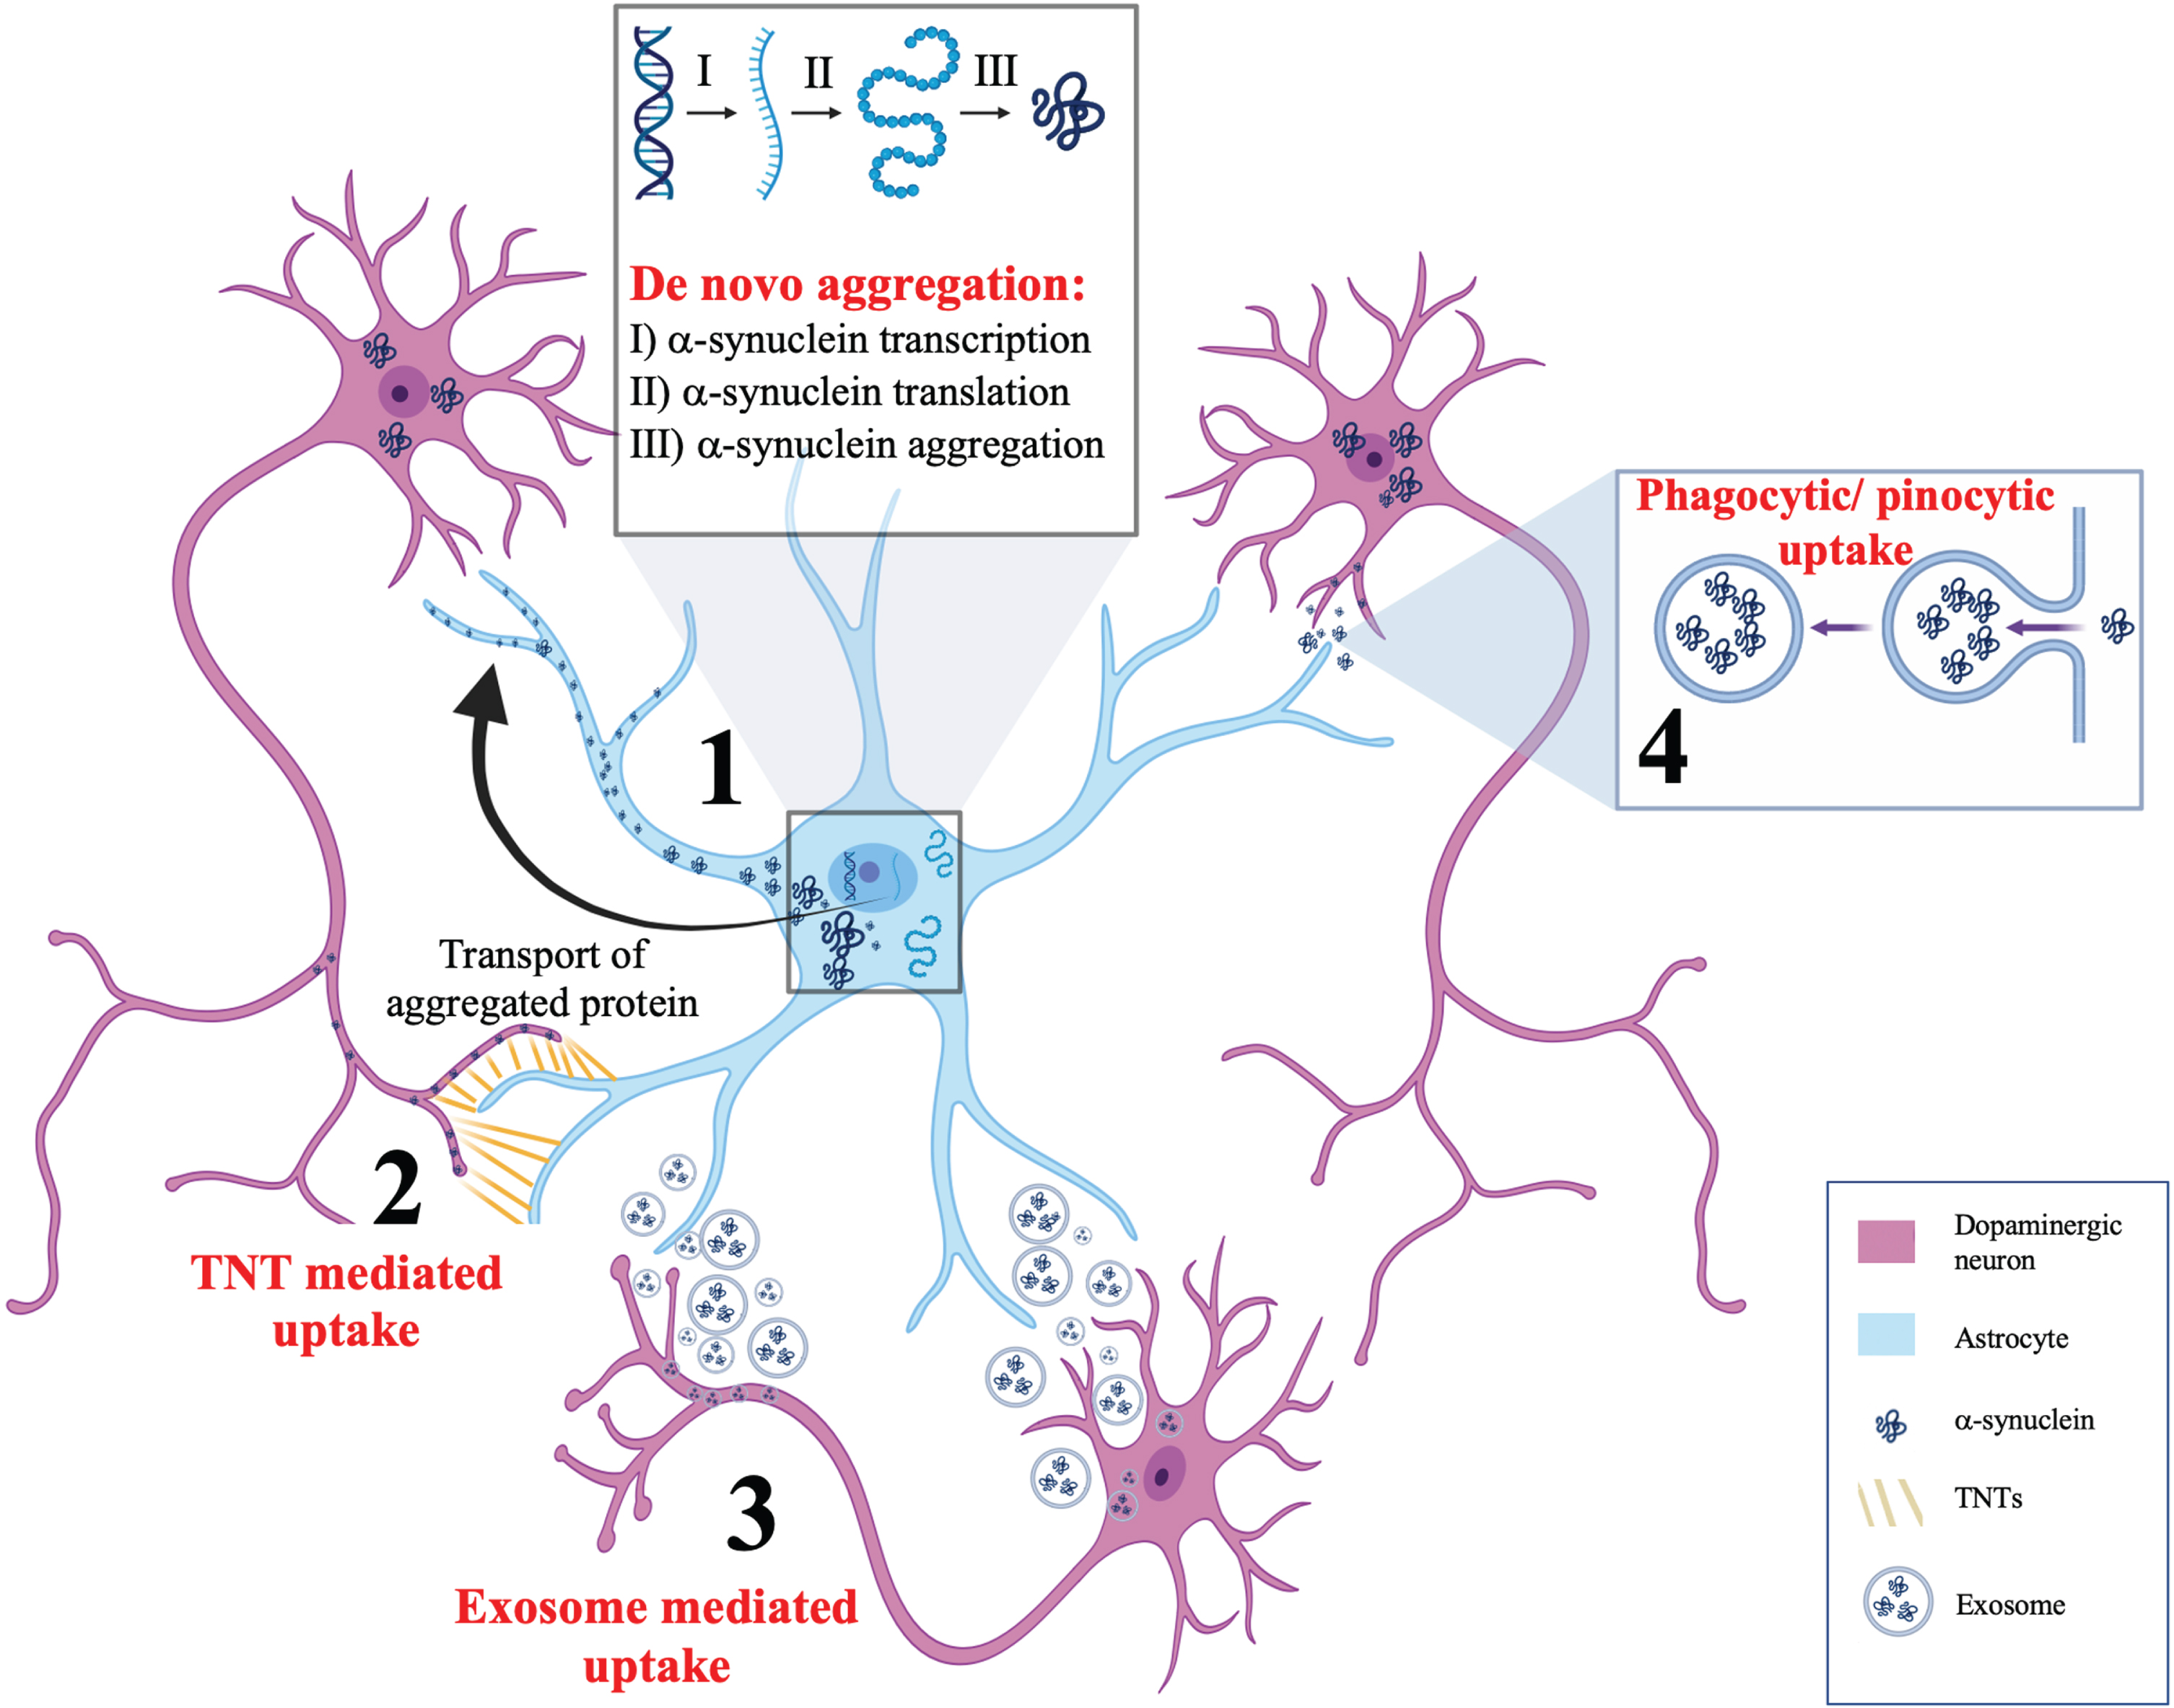 Postulated mechanisms of α-synuclein aggregation in astrocytes. This schematic summarizes four potential mechanisms for α-synuclein accumulation in astrocytes. (1) De novo aggregation of α-synuclein showing α-synuclein transcription, translation, and aggregation in astrocytes, independent of neuronal α-synuclein. (2) Tunnelling nanotubules (TNTs) are actin rich membranous connections between cytosols of individual cells that are capable of bidirectional α-synuclein transfer between astrocytes and neurons. (3) Secretion of exosomes from astrocytes and neurons have been postulated as a mechanism for bidirectional α-synuclein transfer between neurons and astrocytes. (4) Phagocytic or pinocytic uptake of α-synuclein from neurons to astrocytes is widely regarded as the most likely model by which α-synuclein accumulates in astrocytes.